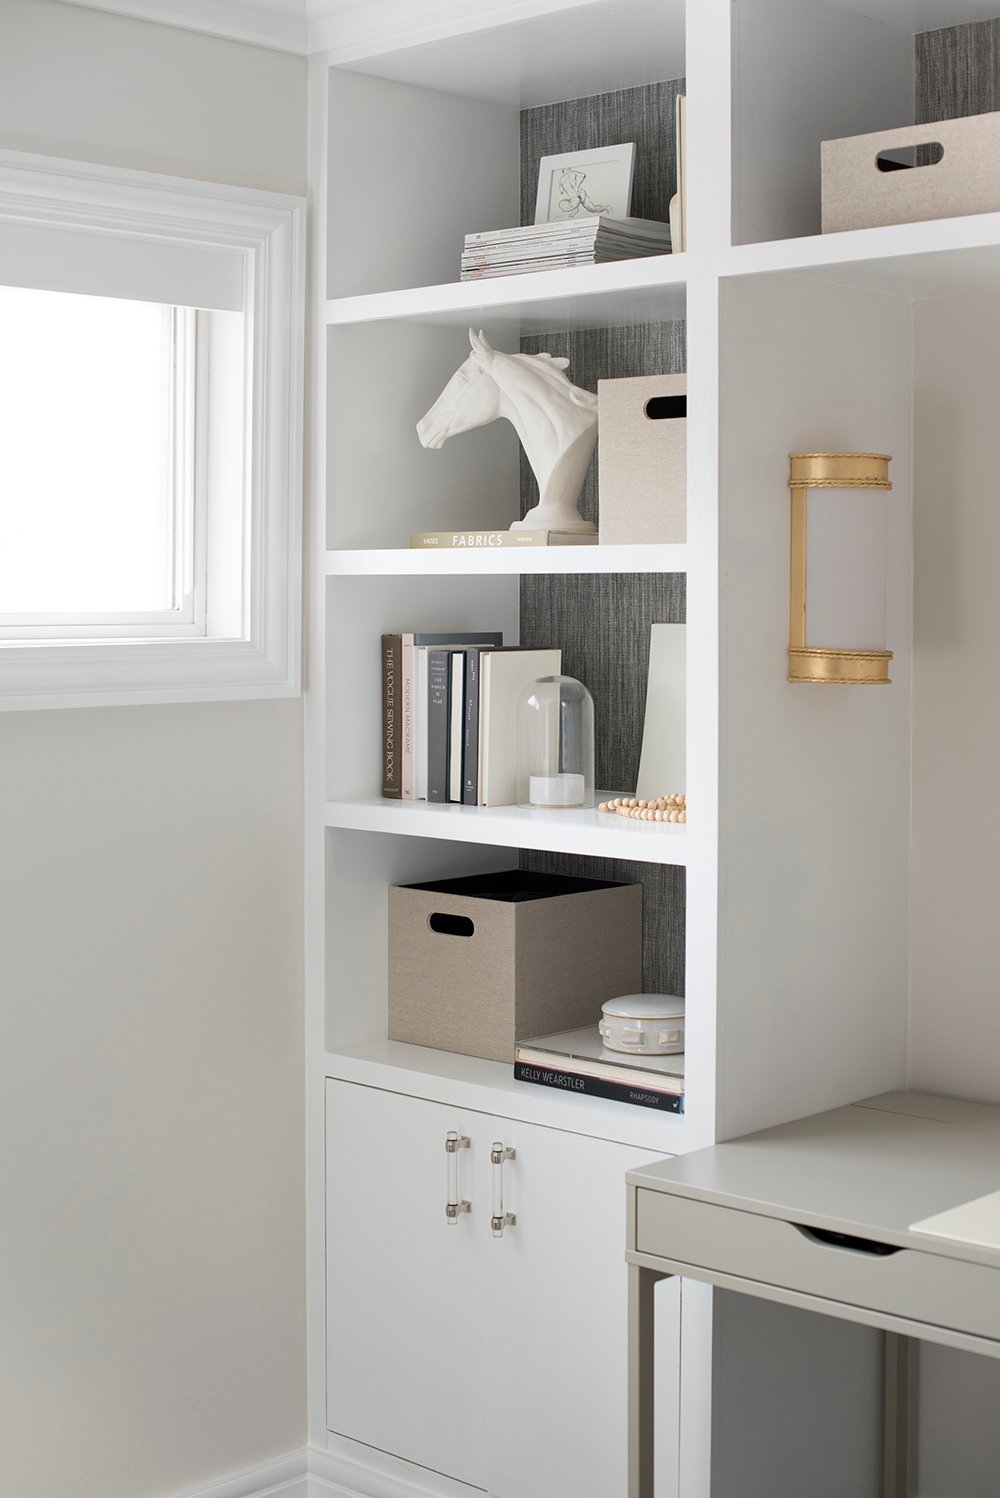 DIY Built-Ins and Office Organization - roomfortuesday.com